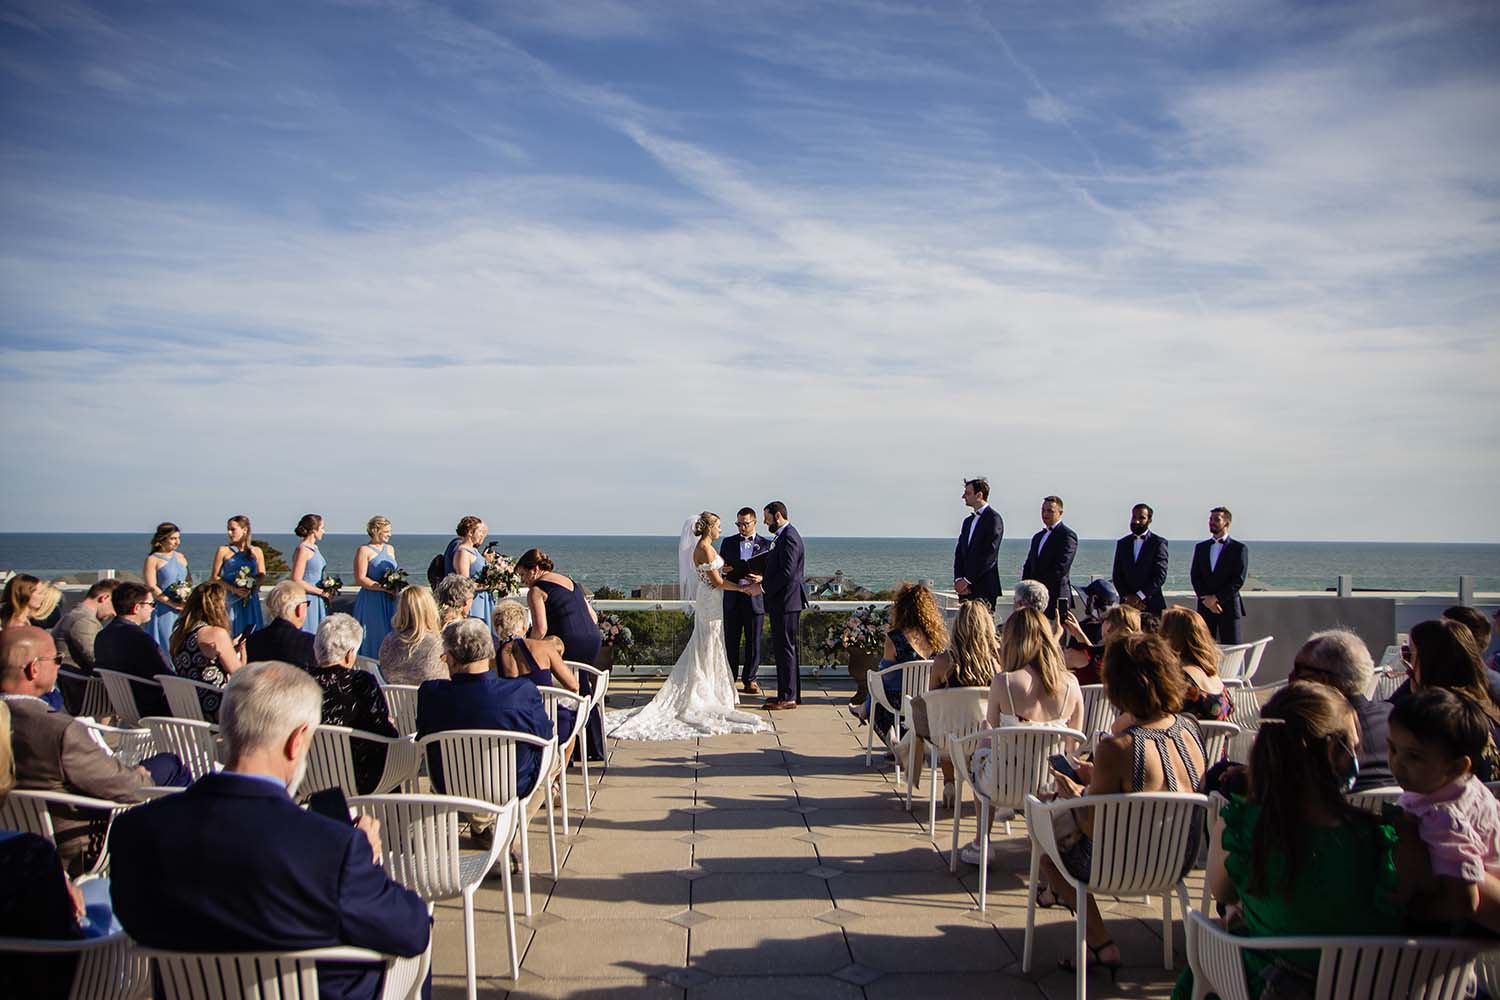 Sweetgrass In at Wild Dunes Ceremony on the Rooftop Terrace wedding venue